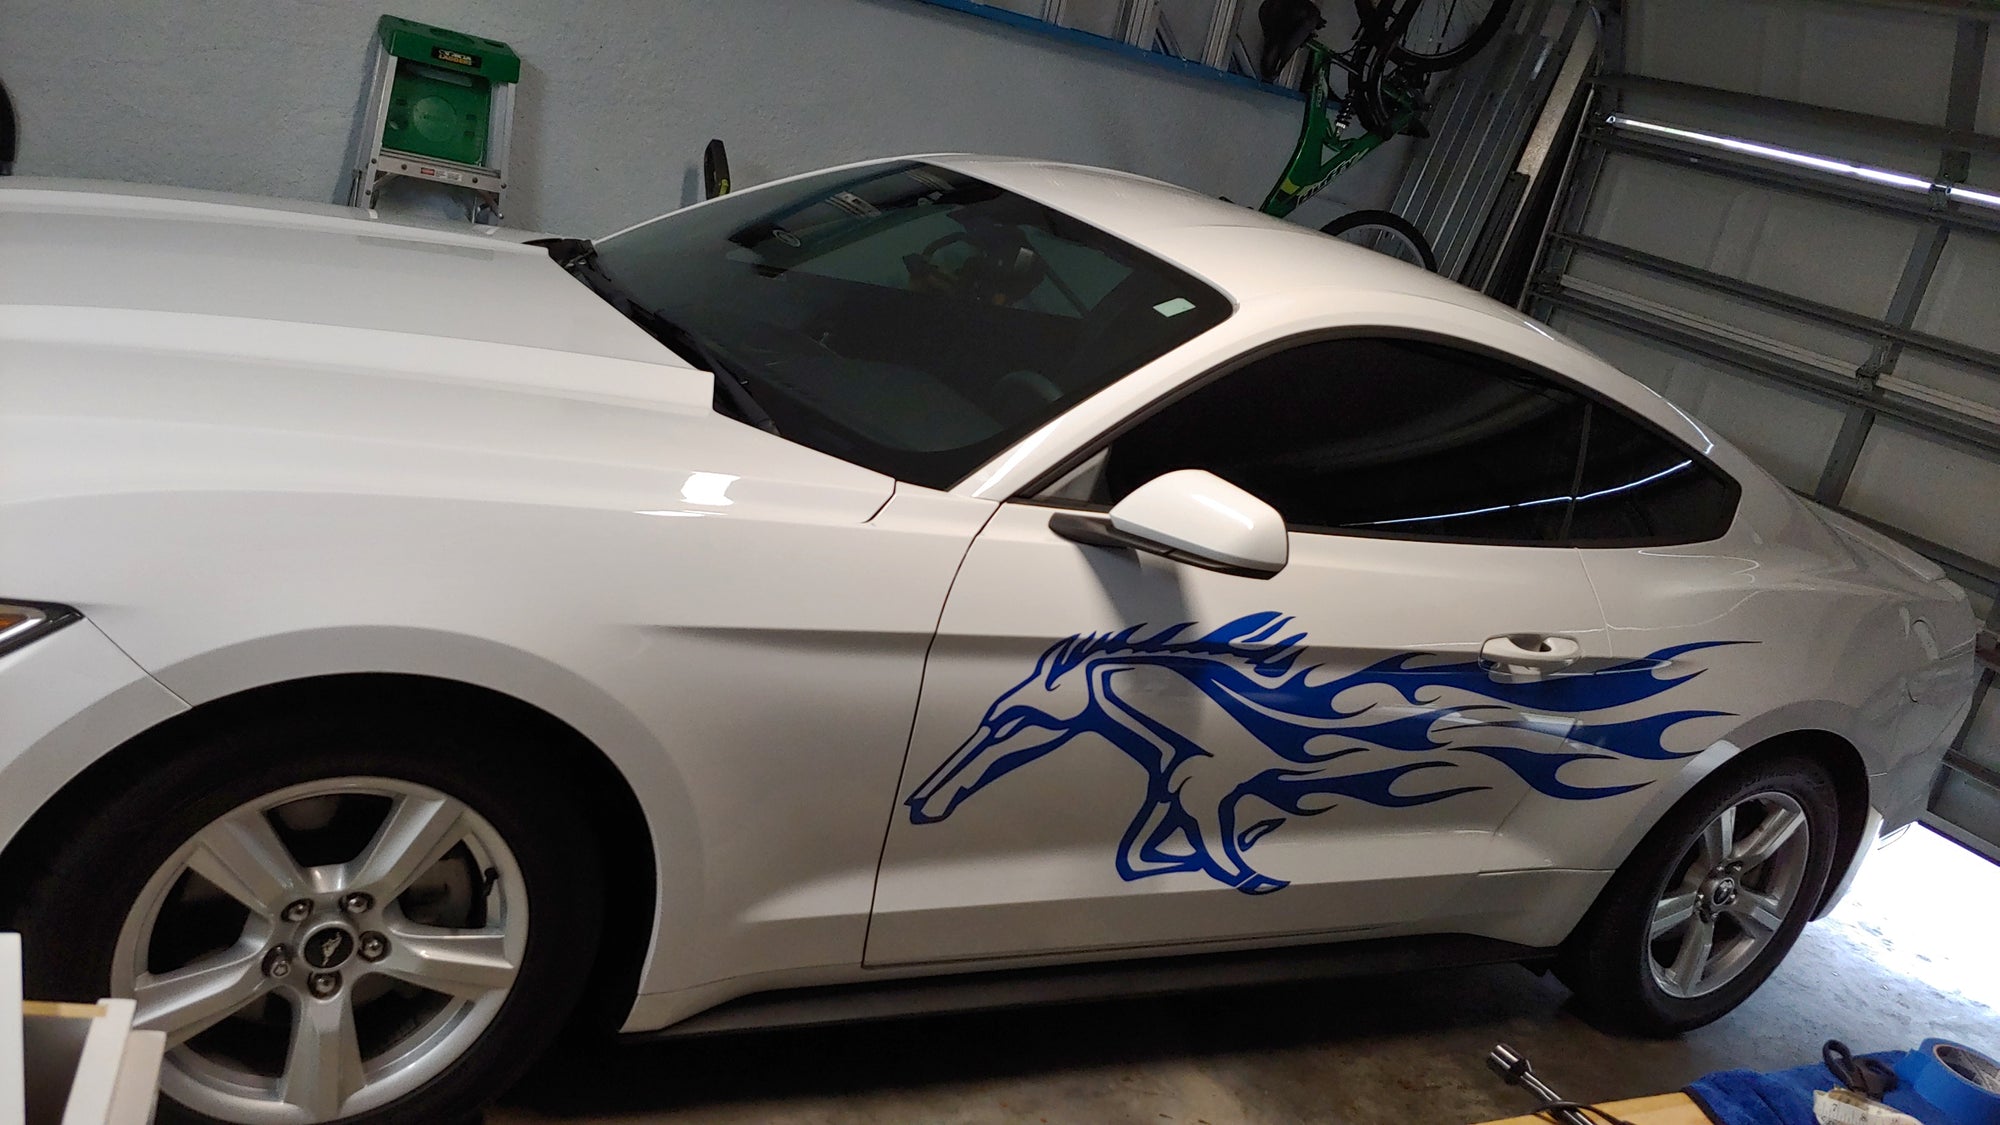 Running Horse Decal on the side of white Ford Mustang car